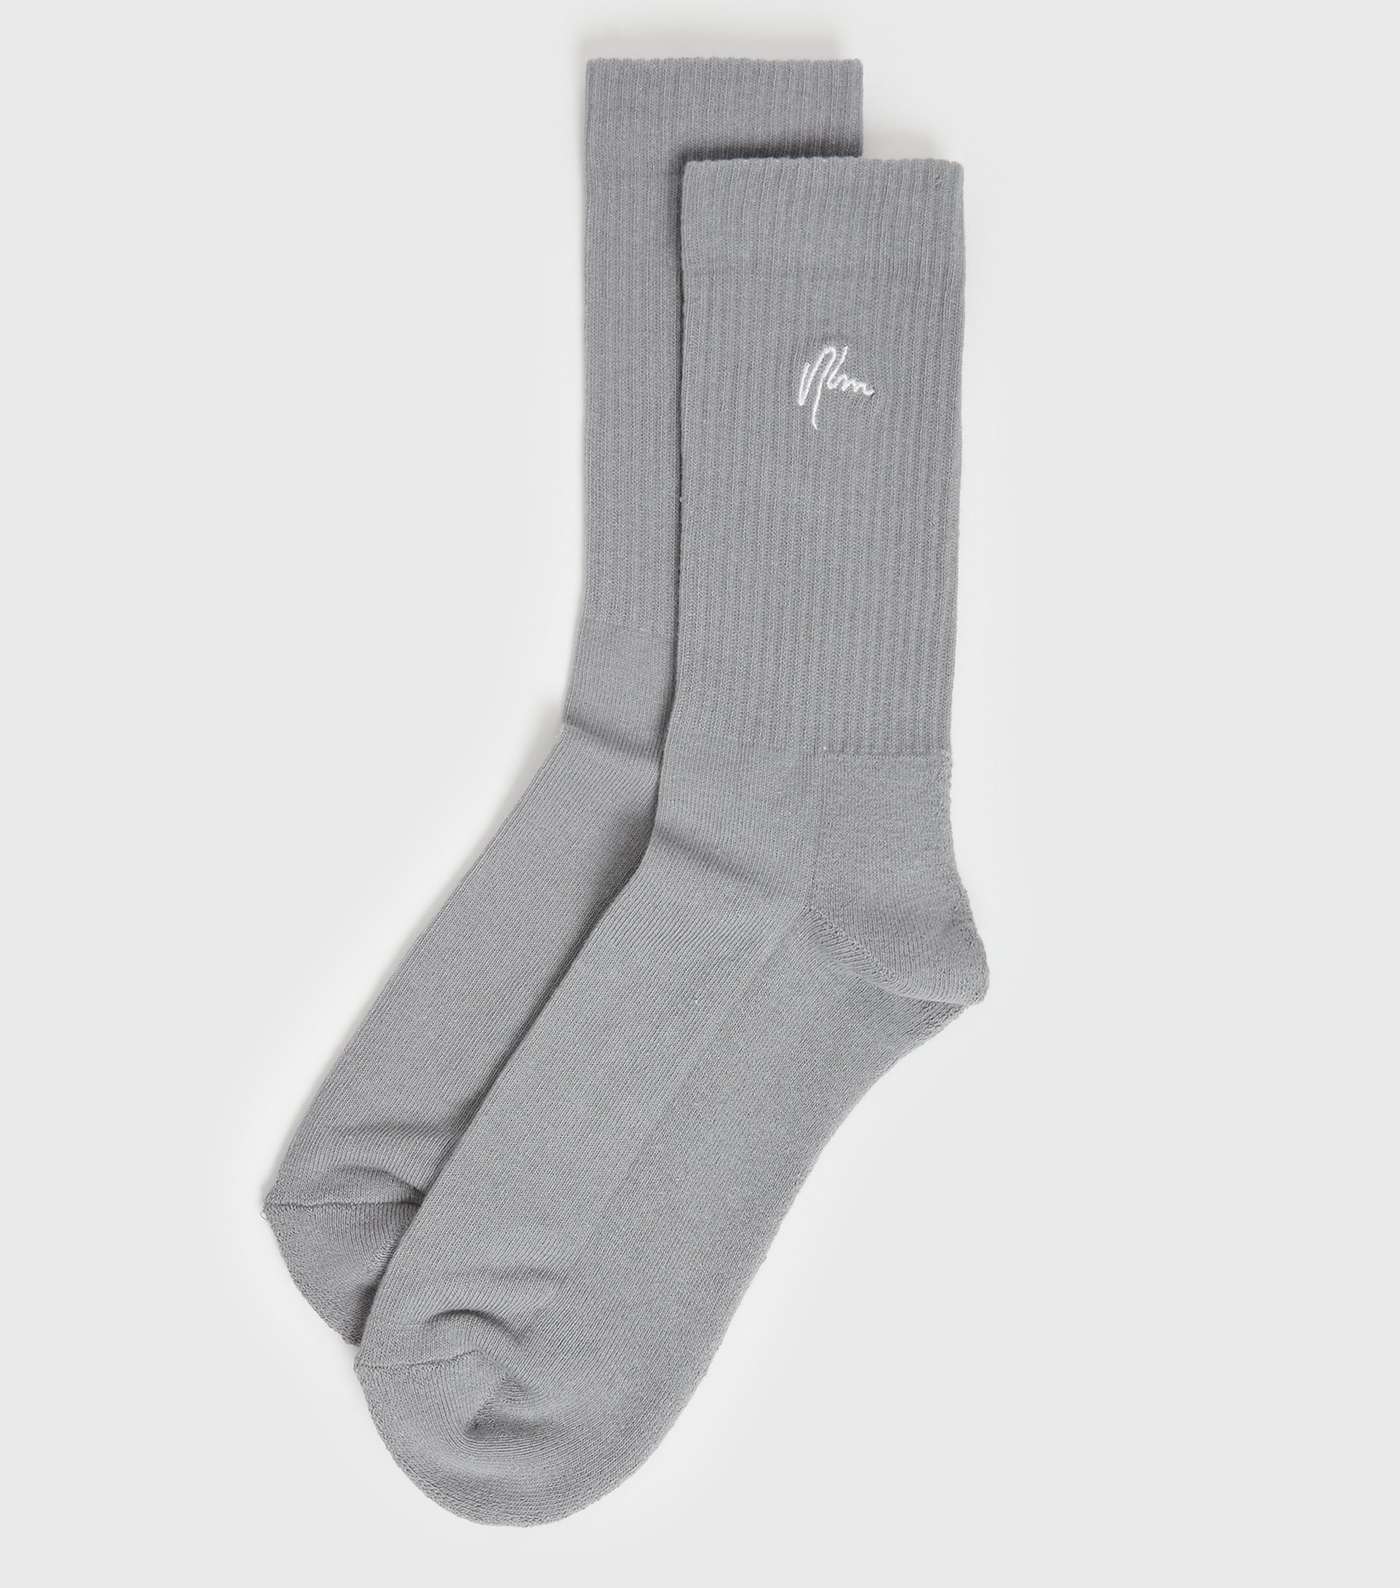 Pale Grey Ribbed NLM Embroidered Socks